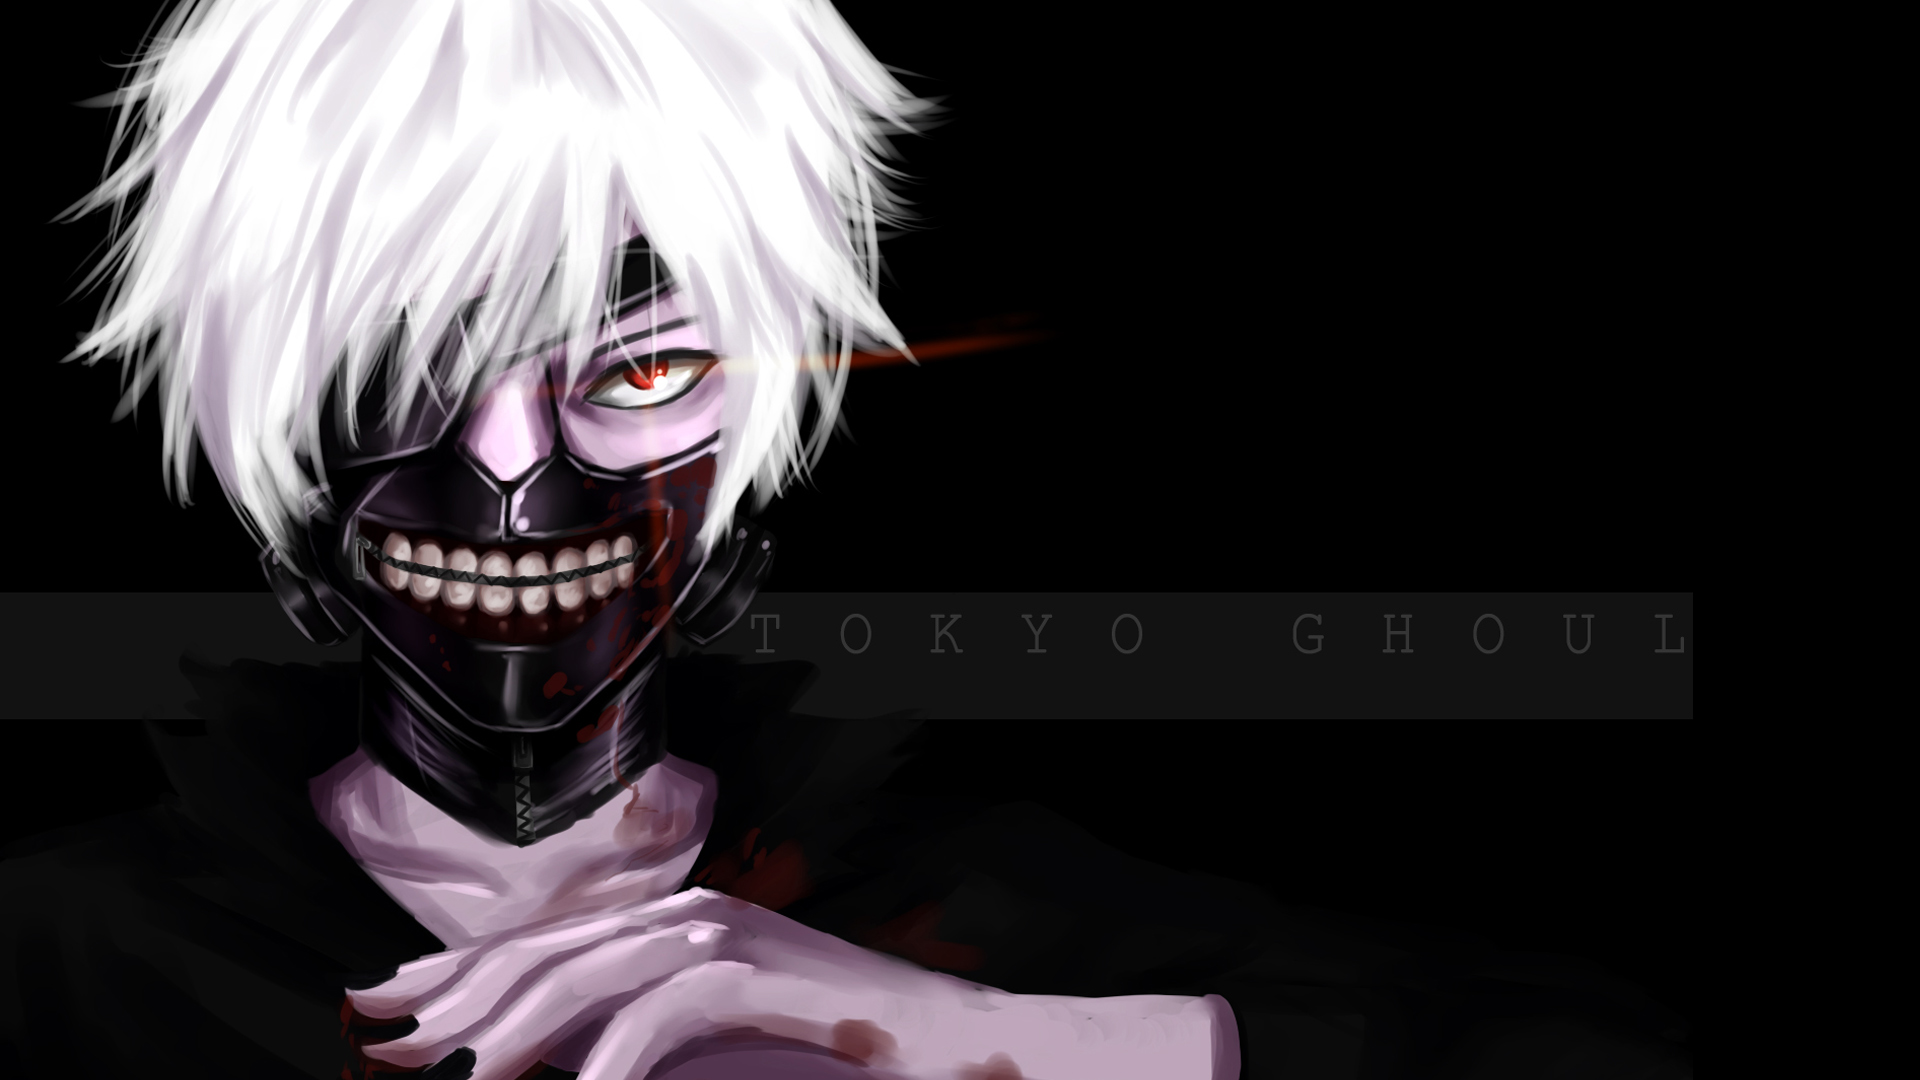 290 Tokyo Ghoul HD Wallpapers | Backgrounds - Wallpaper Abyss - Page 4